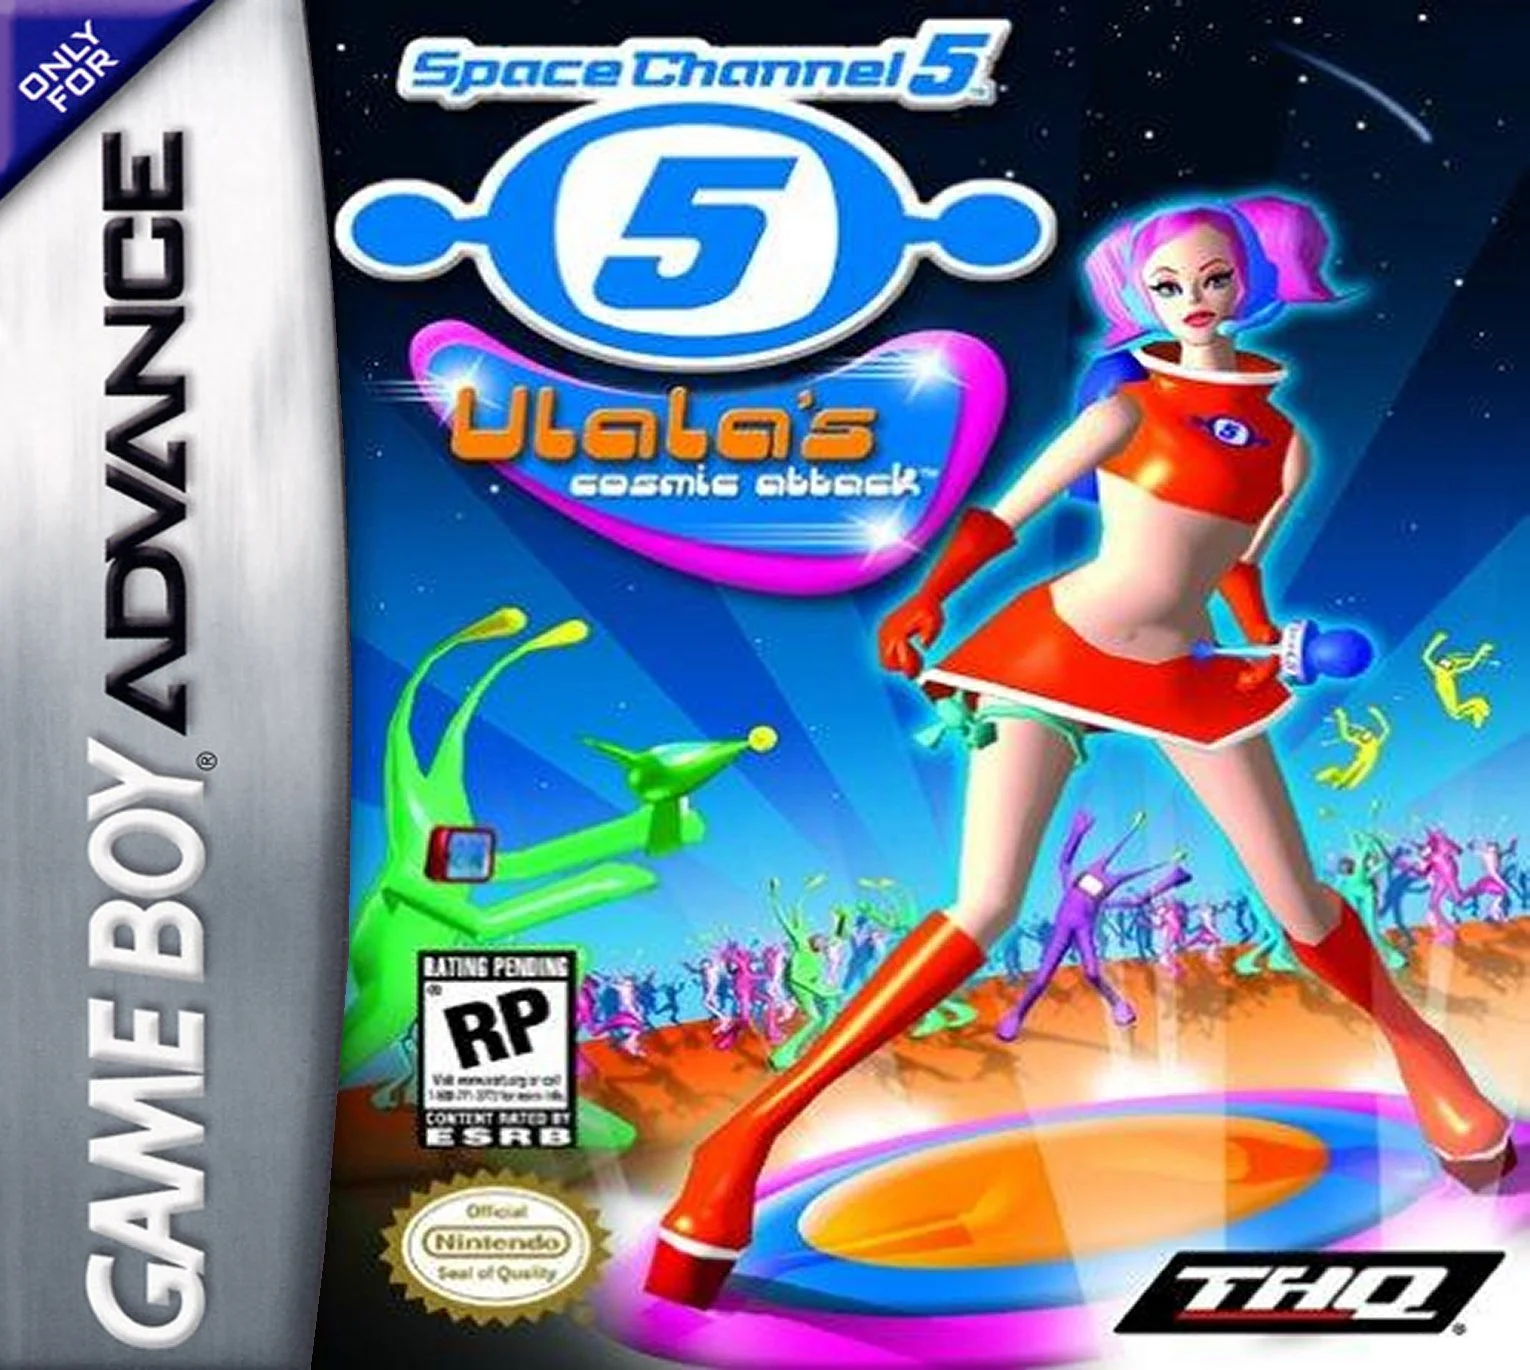 Space Channel 5: Ulala's Cosmic Attack